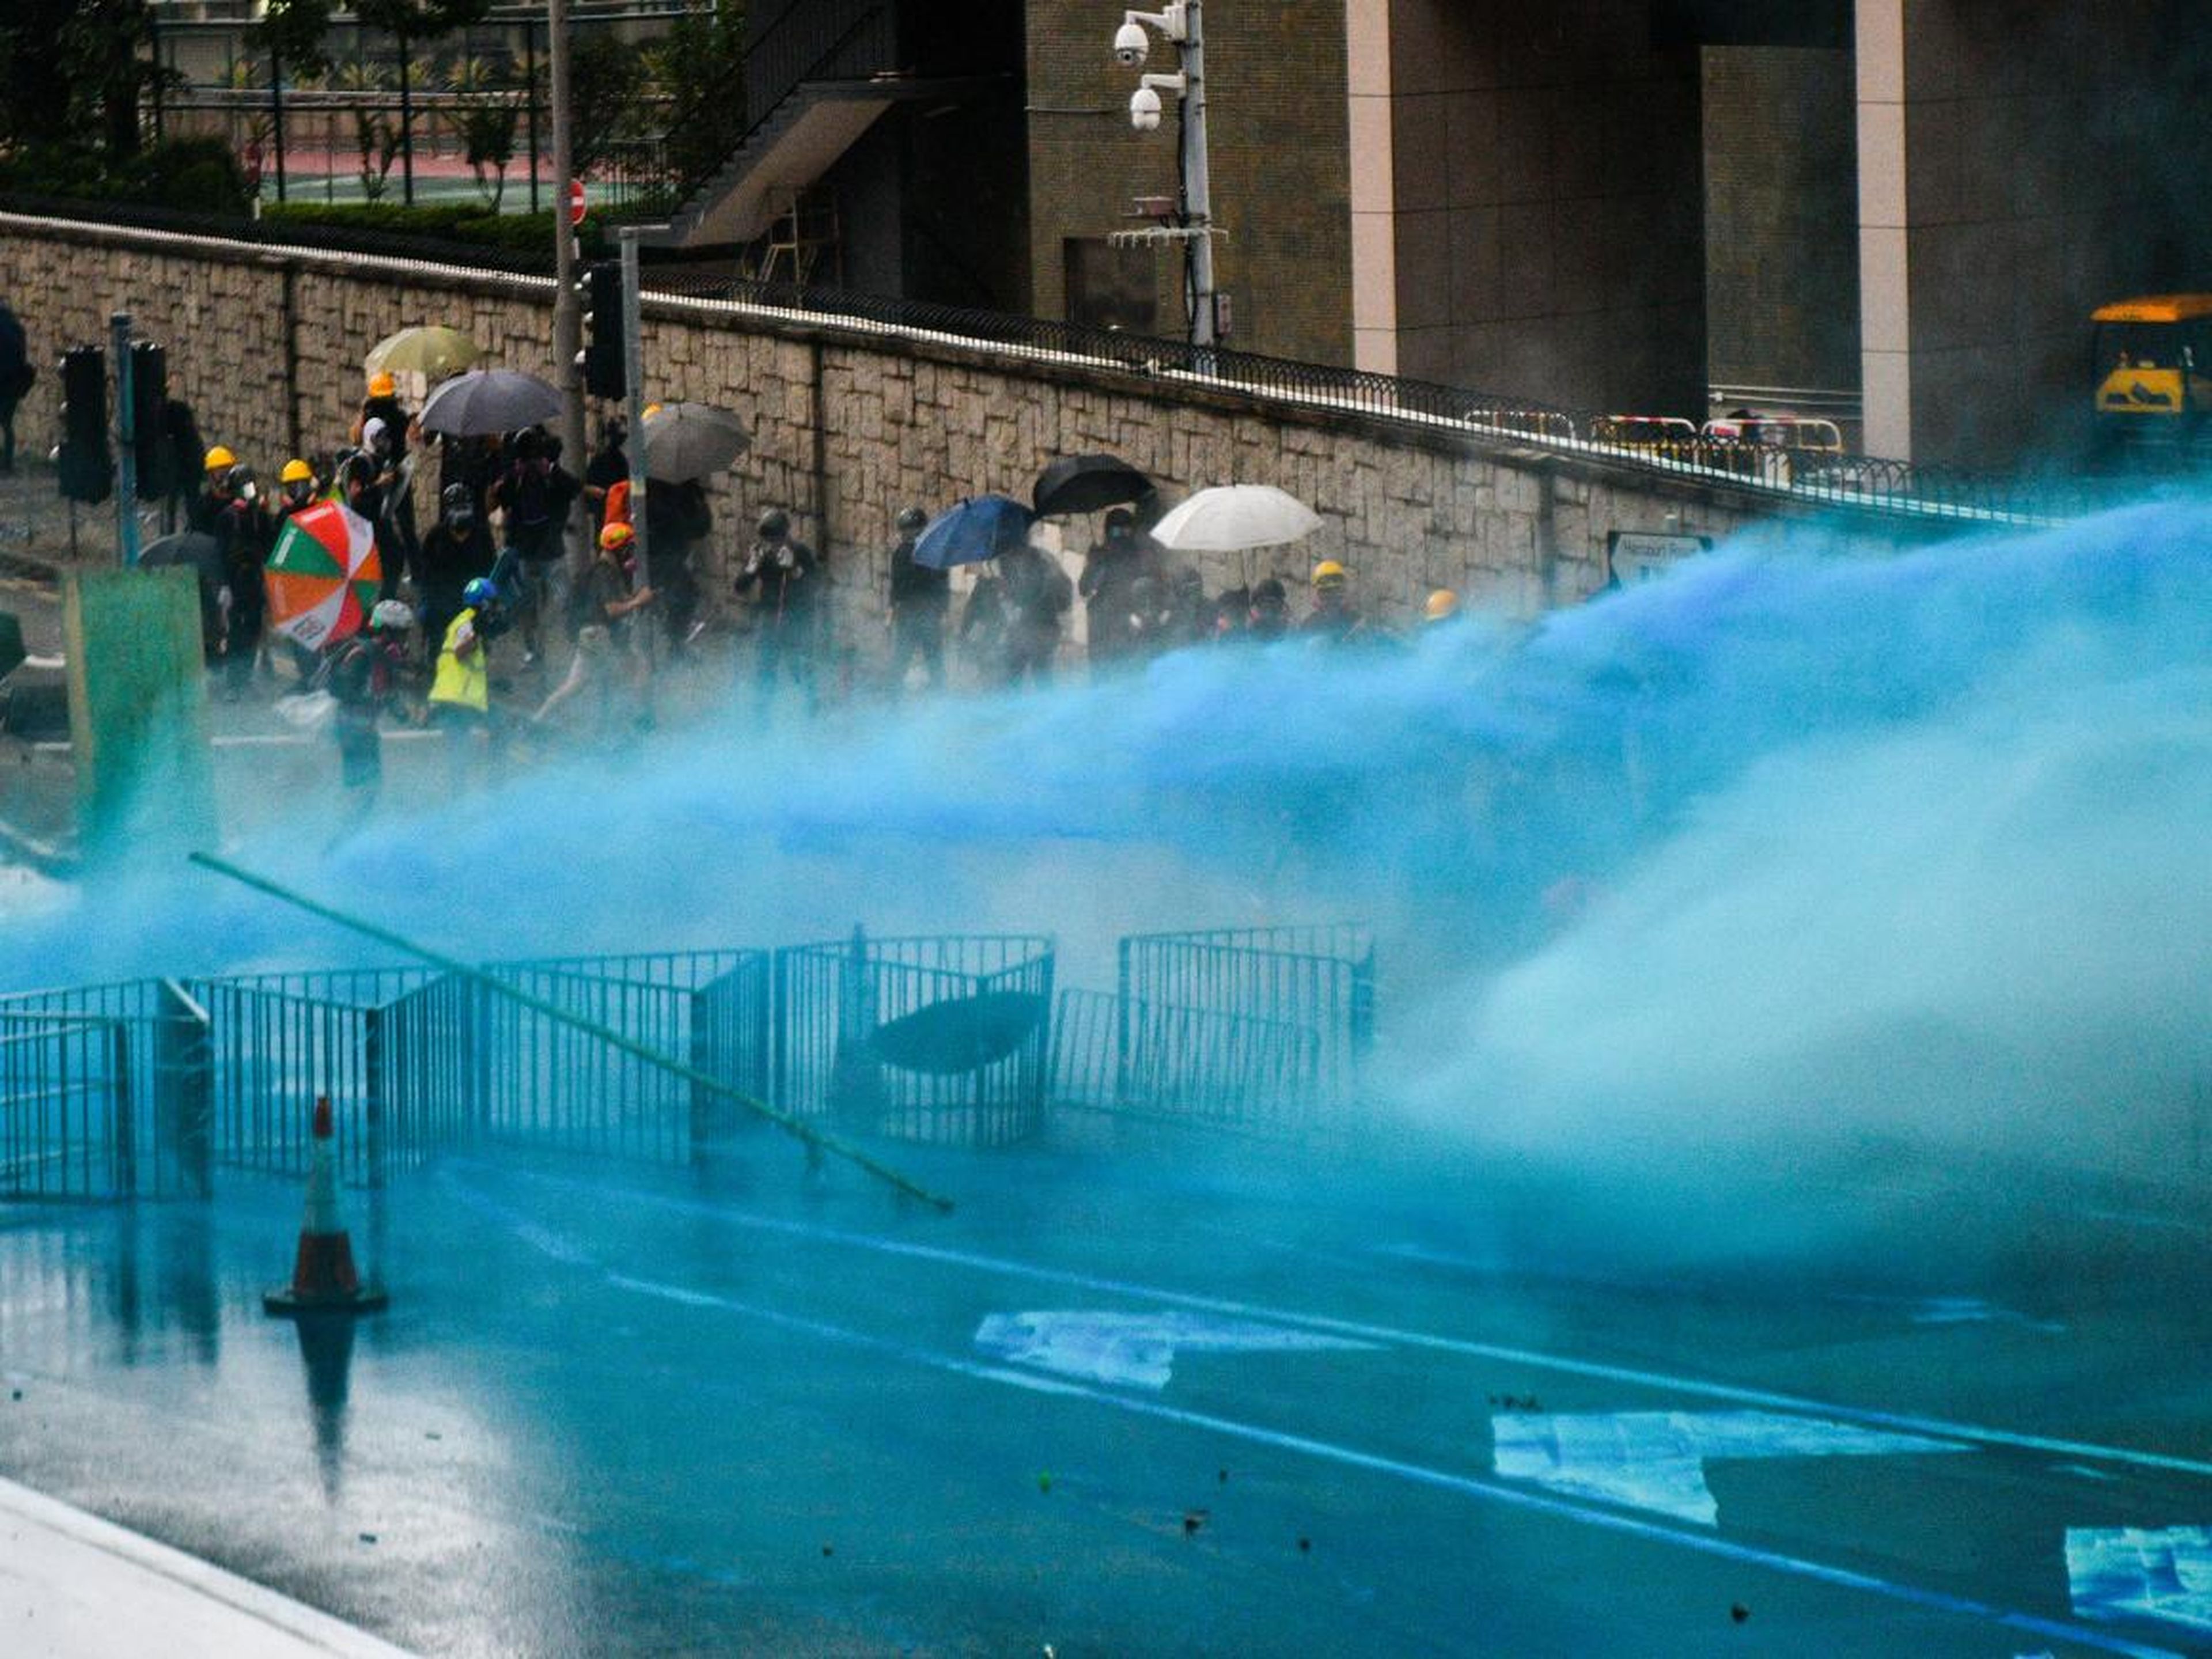 Water cannons coloured with blue dye spray protesters.